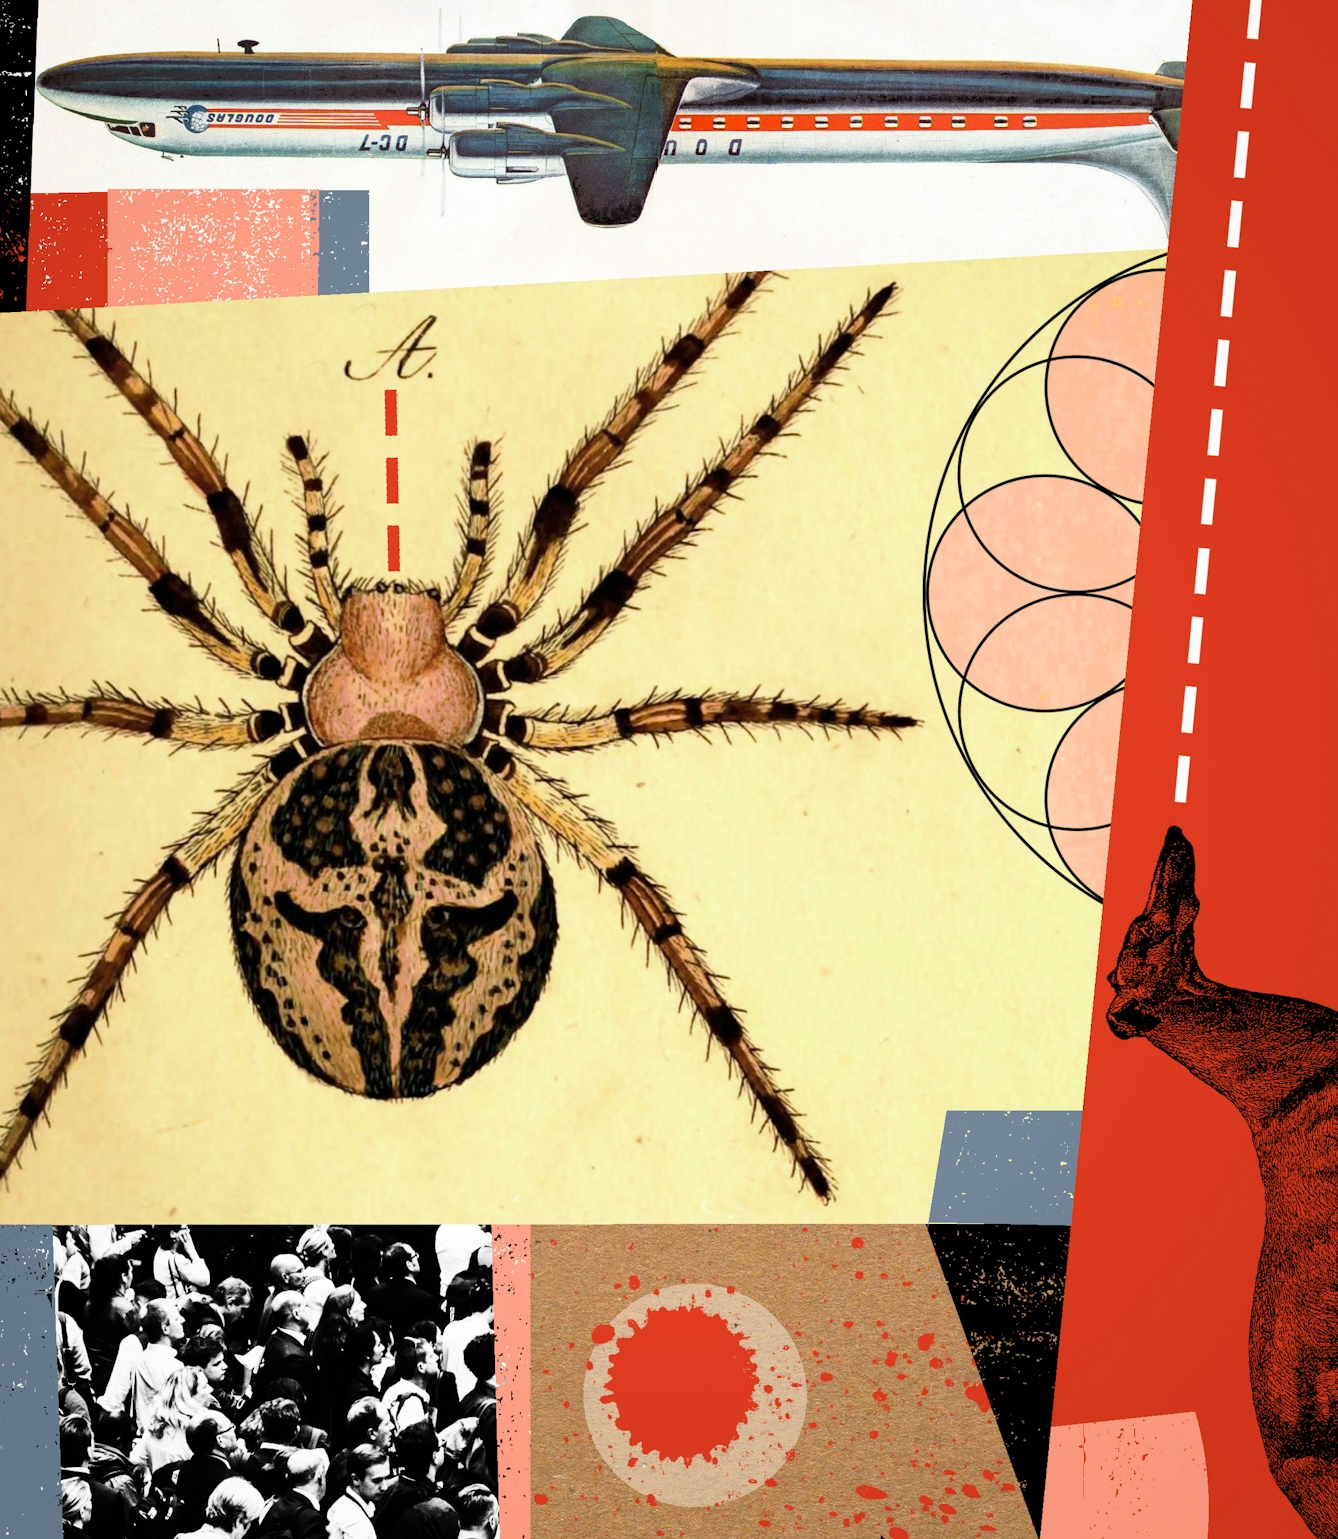 Detail from a larger digital montage artwork made up of archive illustrations, photographs and graphical shapes. The overall hues of the artwork are reds, yellows and blacks. There are a number of references across the artwork including a large spider, an aeroplane flying upside-down, a large crowd, and a dog with a dashed white sightline coming from its head.